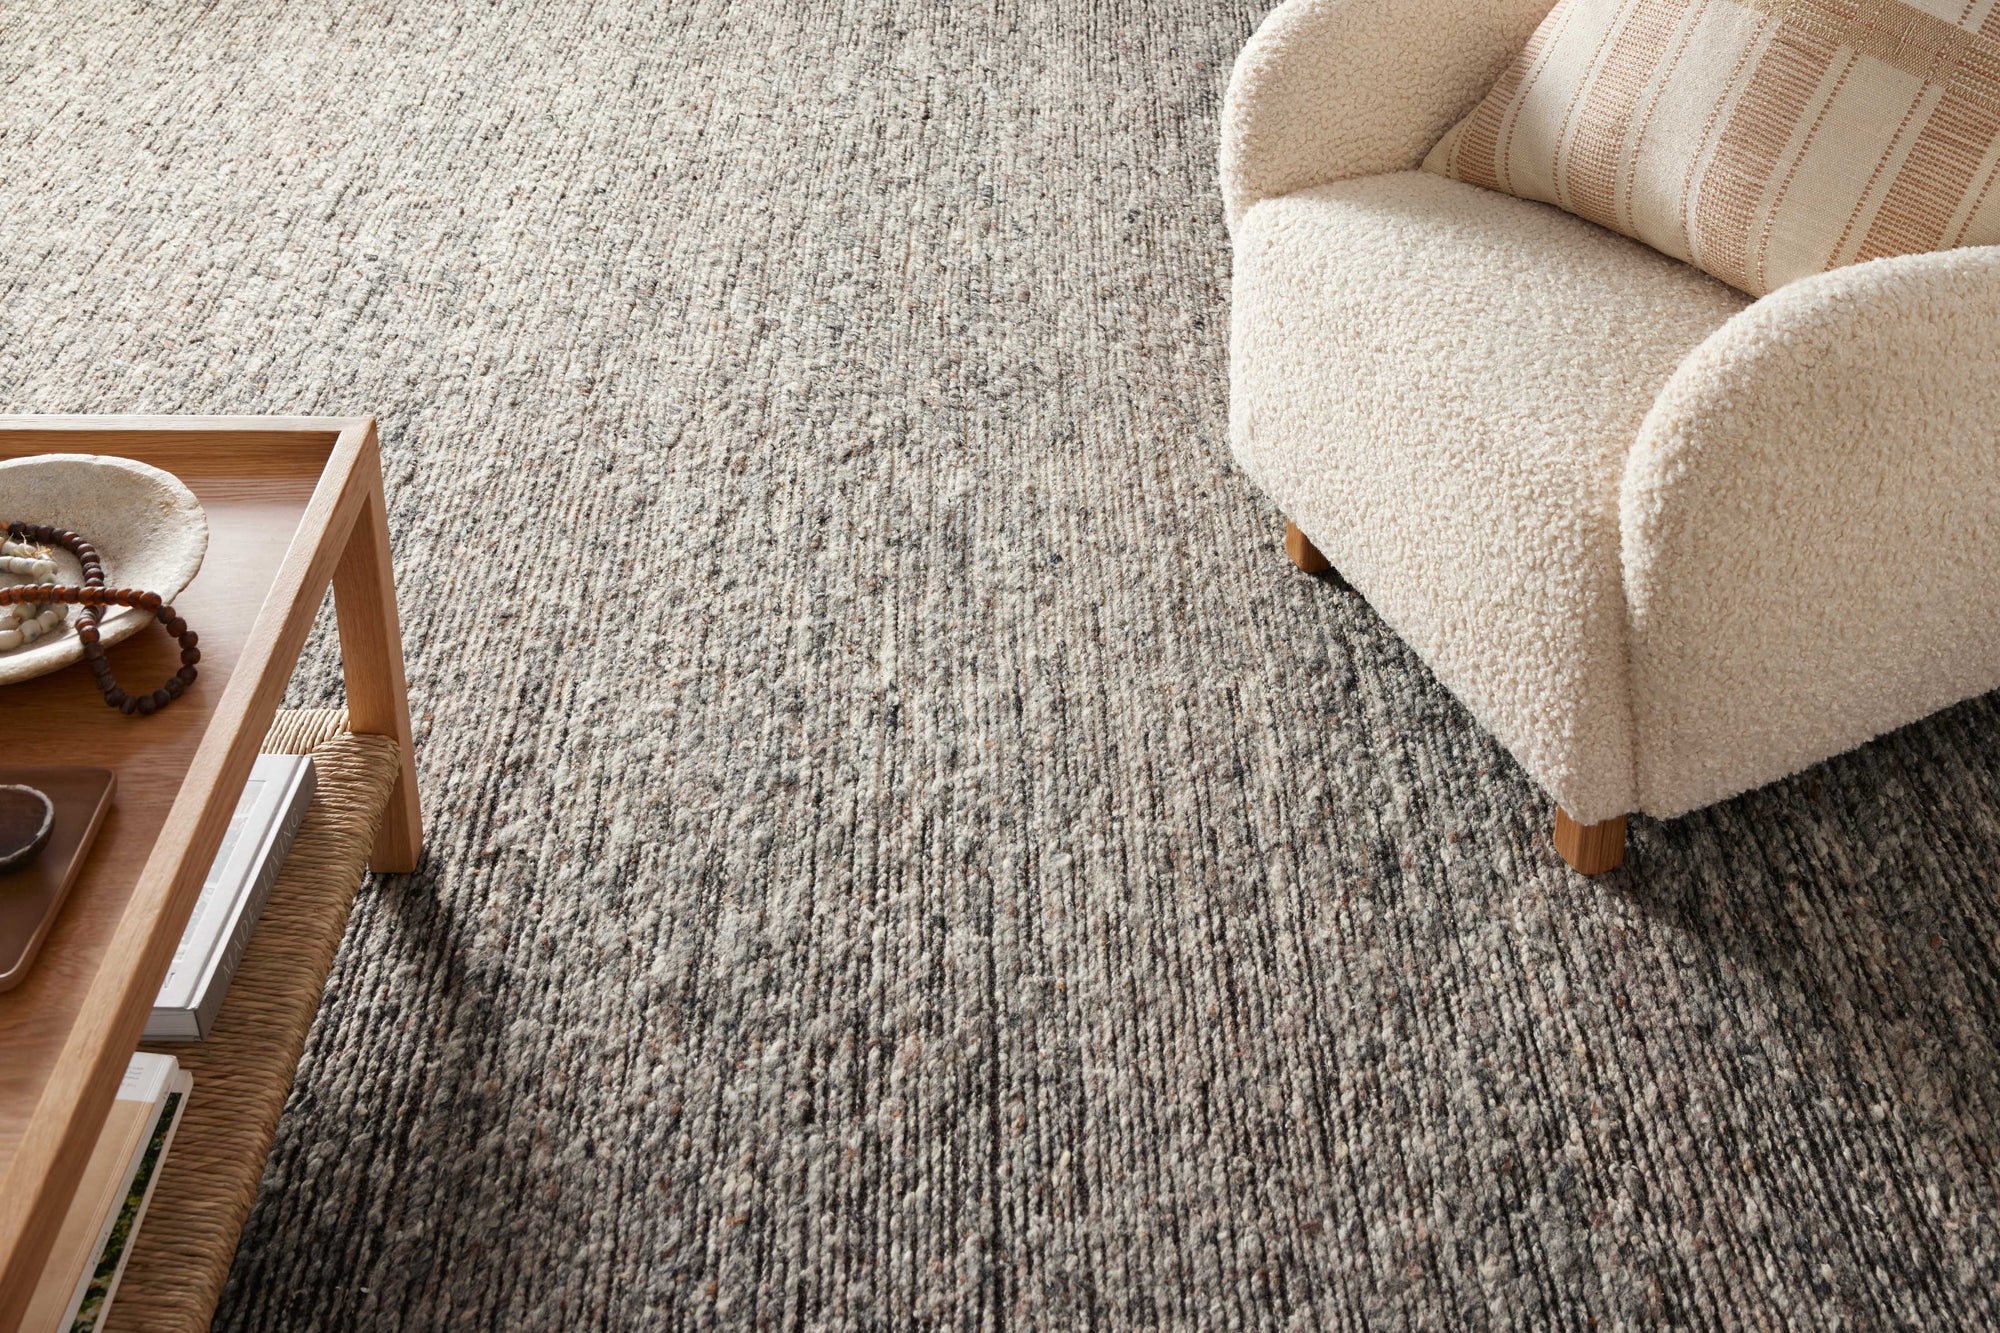 Consider These 3 Things When Choosing A Rug: Color, Texture, and Size